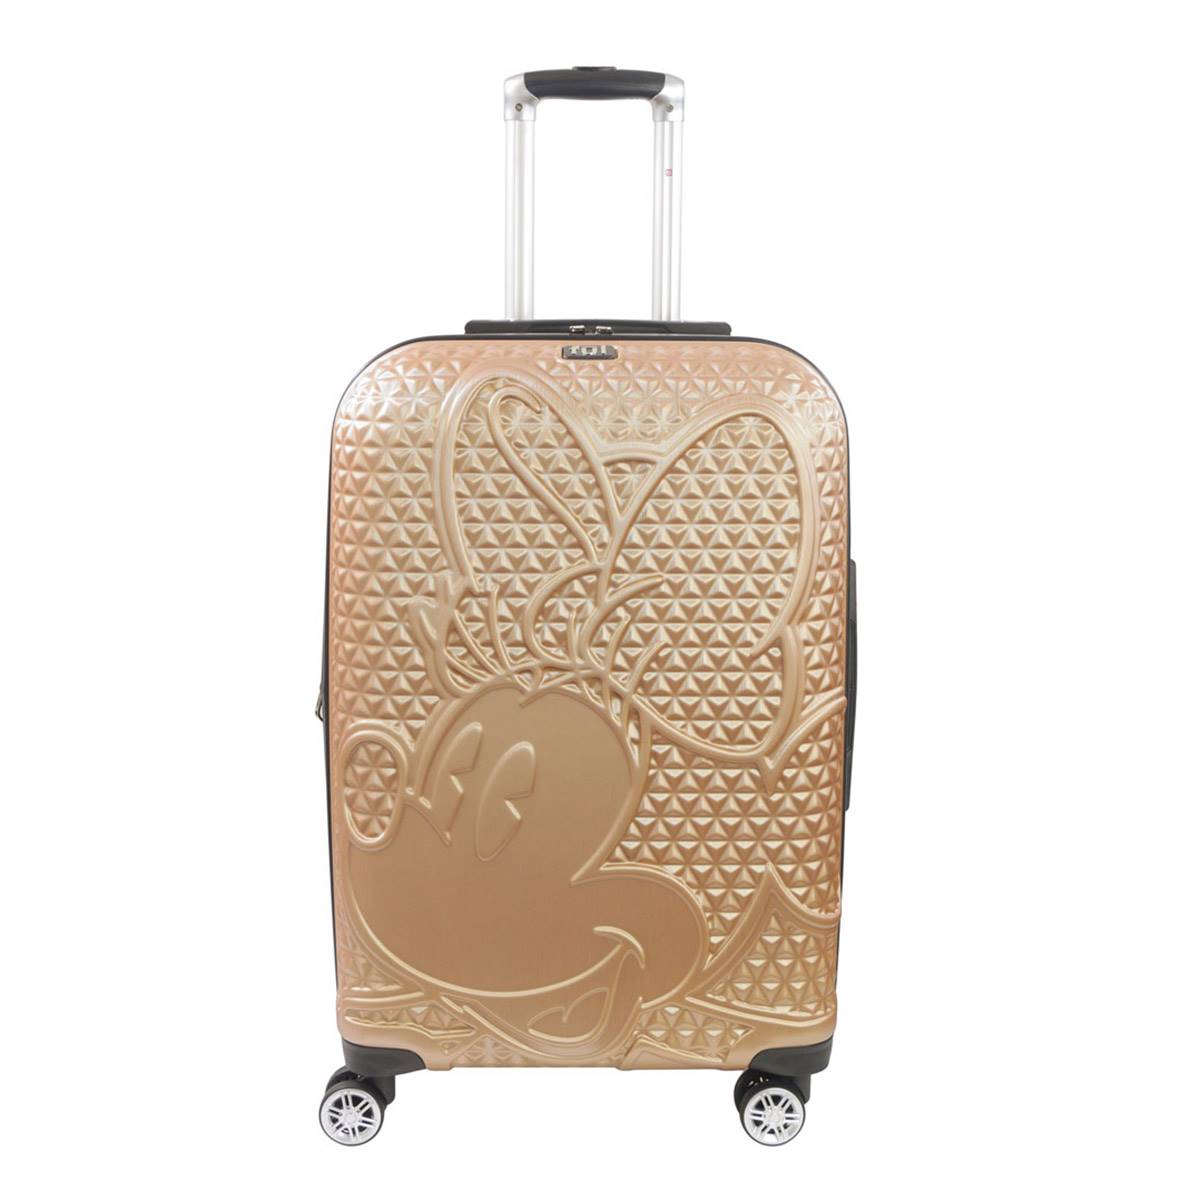 FUL 25in. Minnie Mouse Hardside Luggage